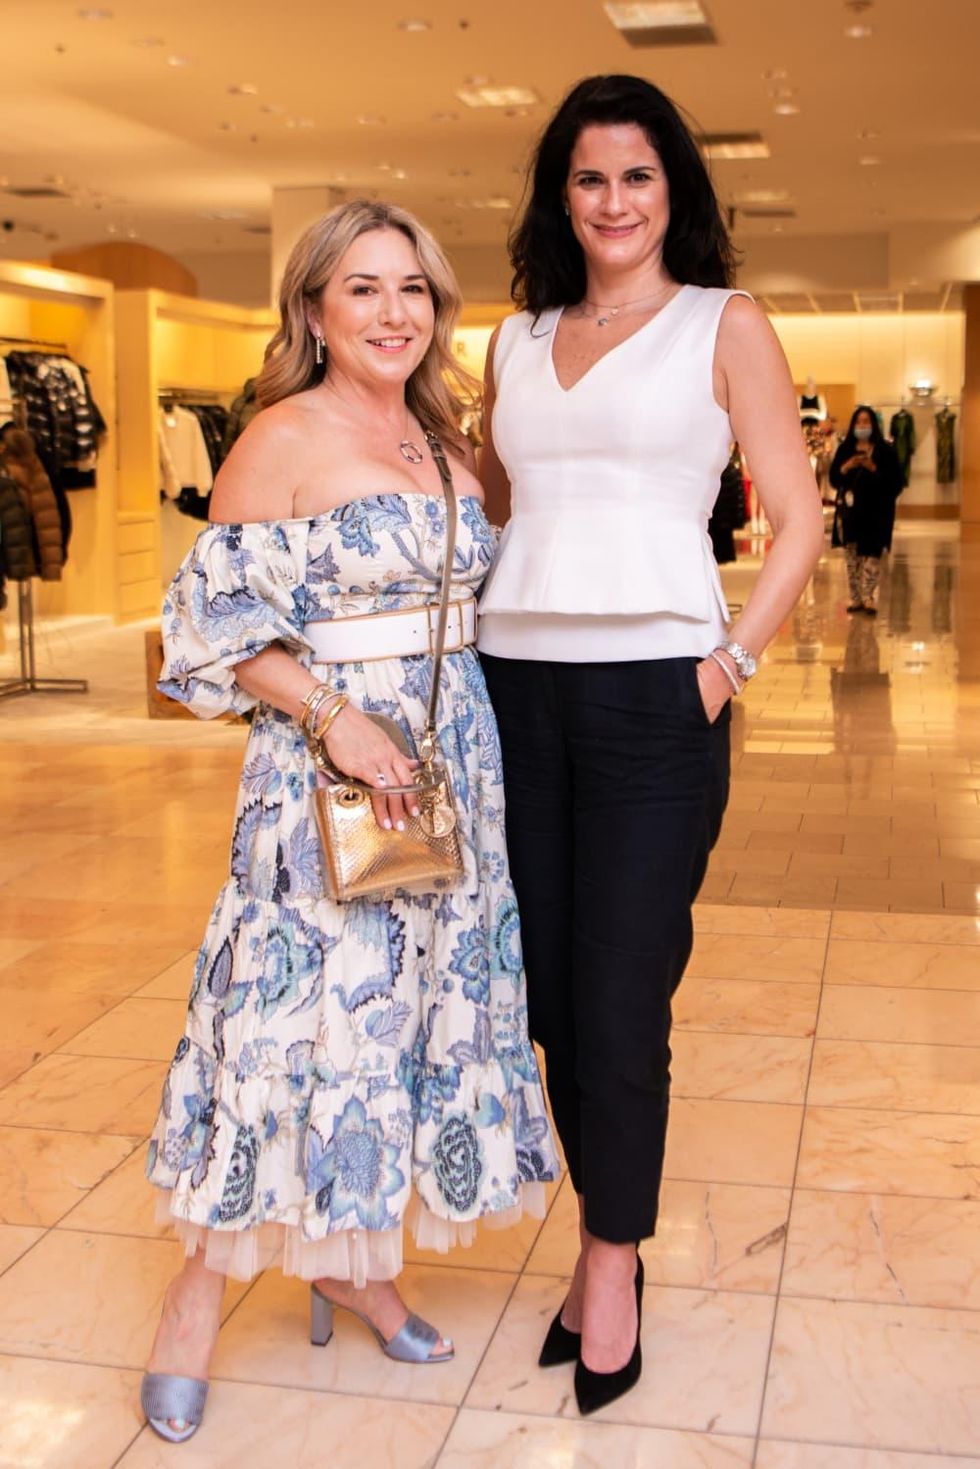 Fun Crowd Gathers at Neiman Marcus To Kick Off Fall's Chic Italy Event -  Houston CityBook